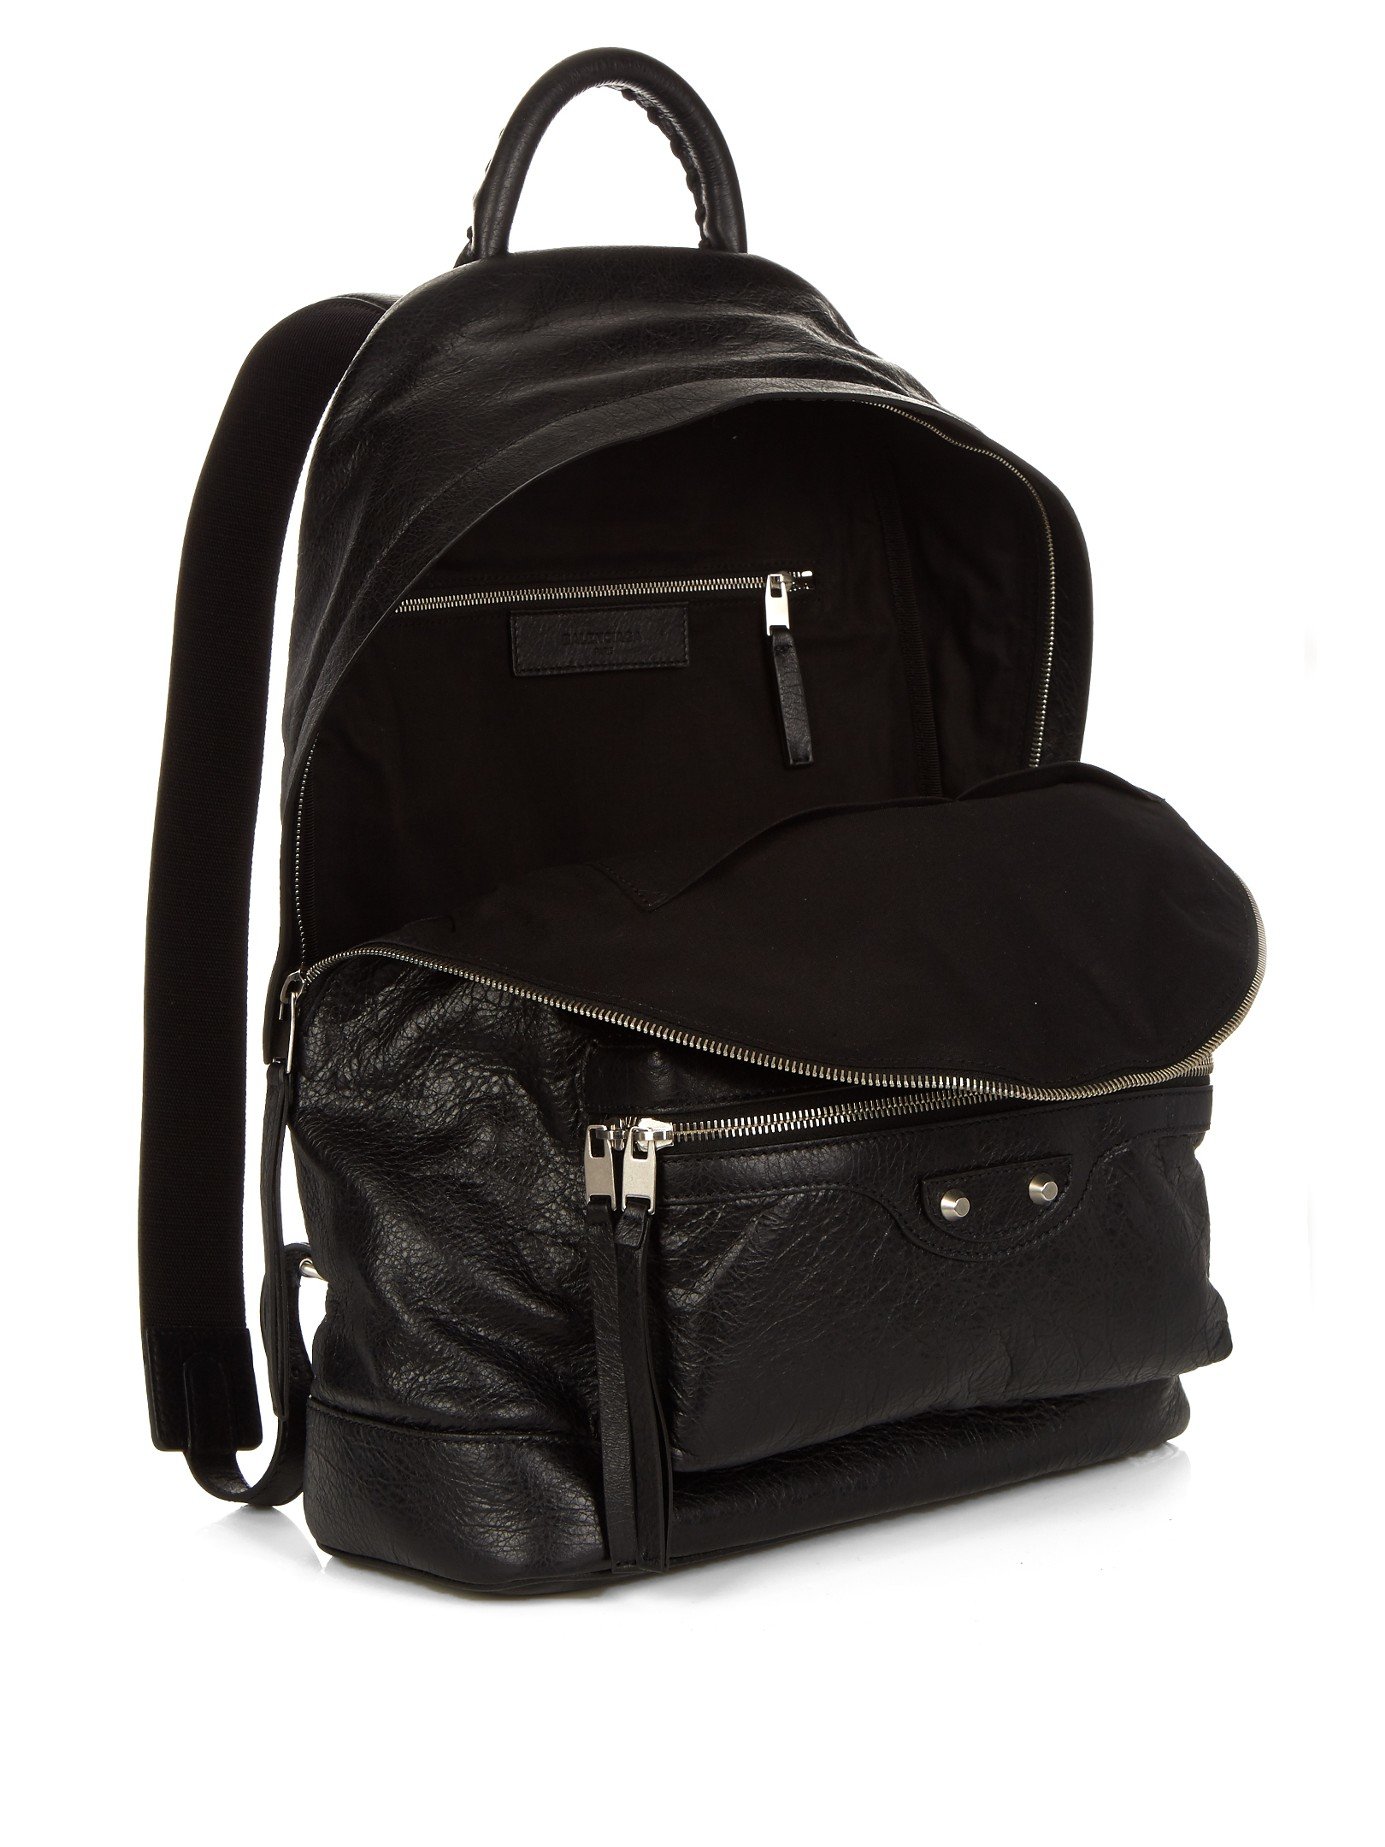 Lyst - Balenciaga Leather Backpack in Black for Men